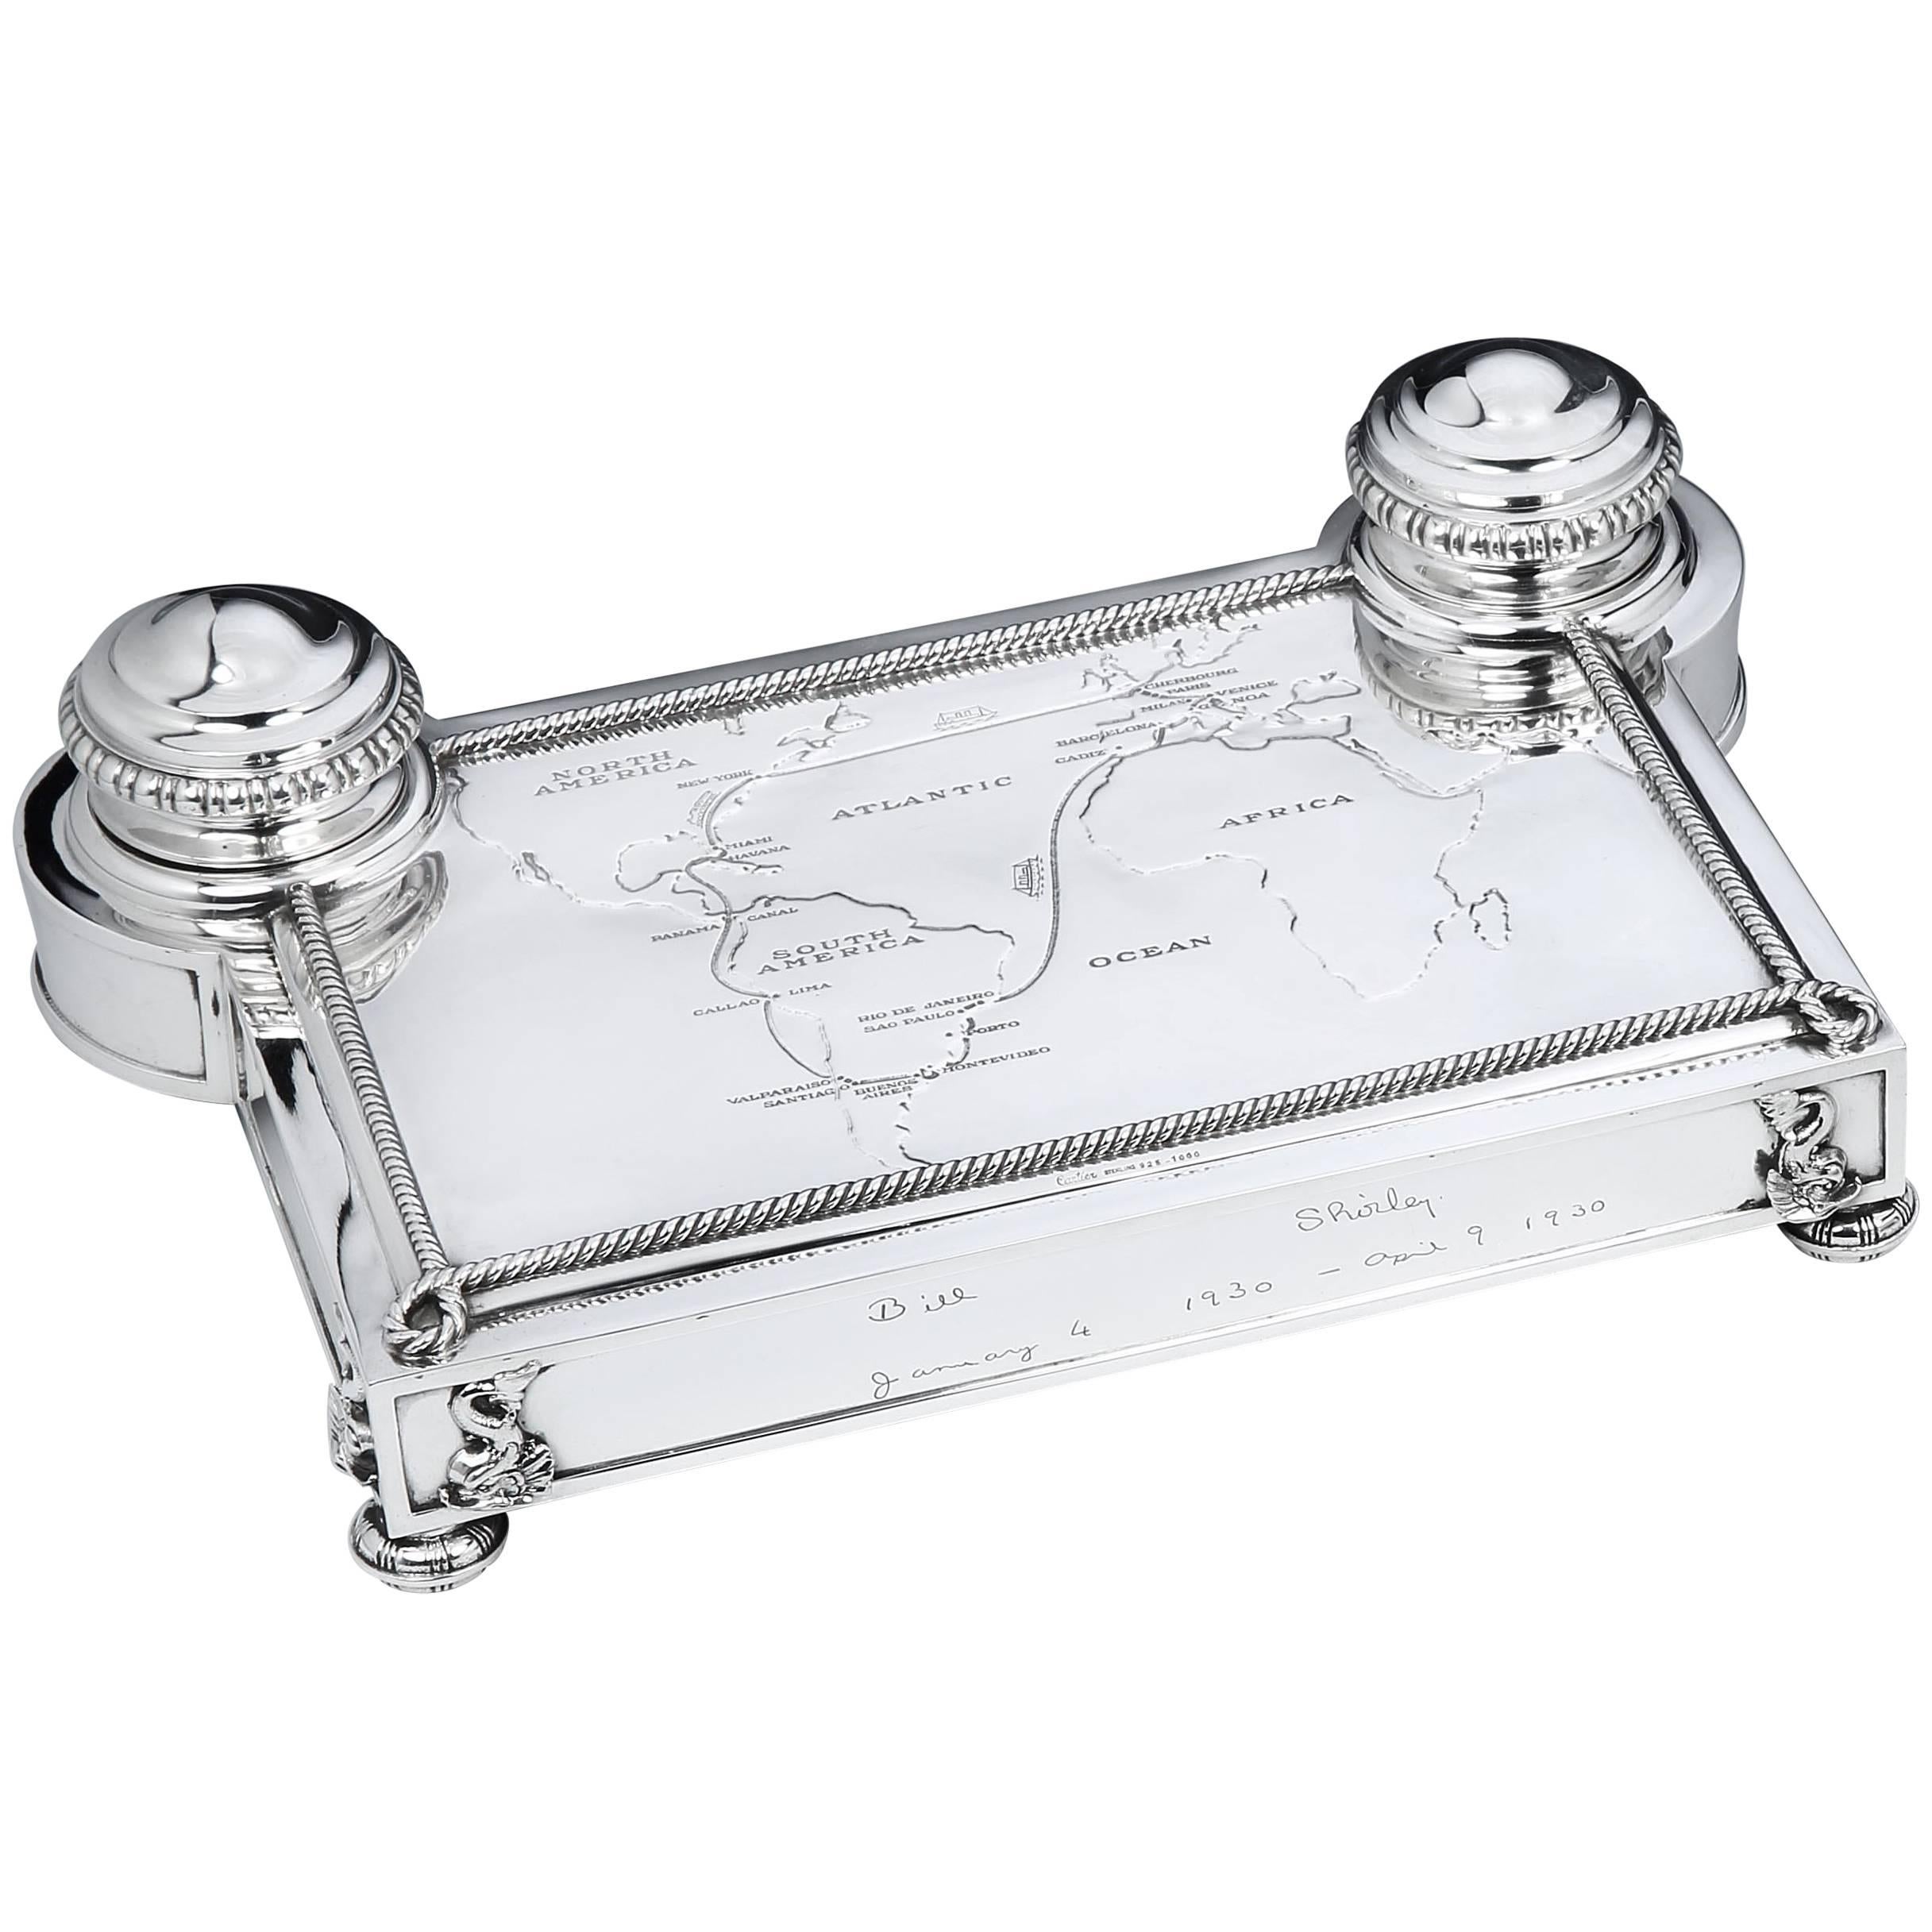 Unique Sterling Silver 'Map of the World' Inkstand, by Cartier, Paris